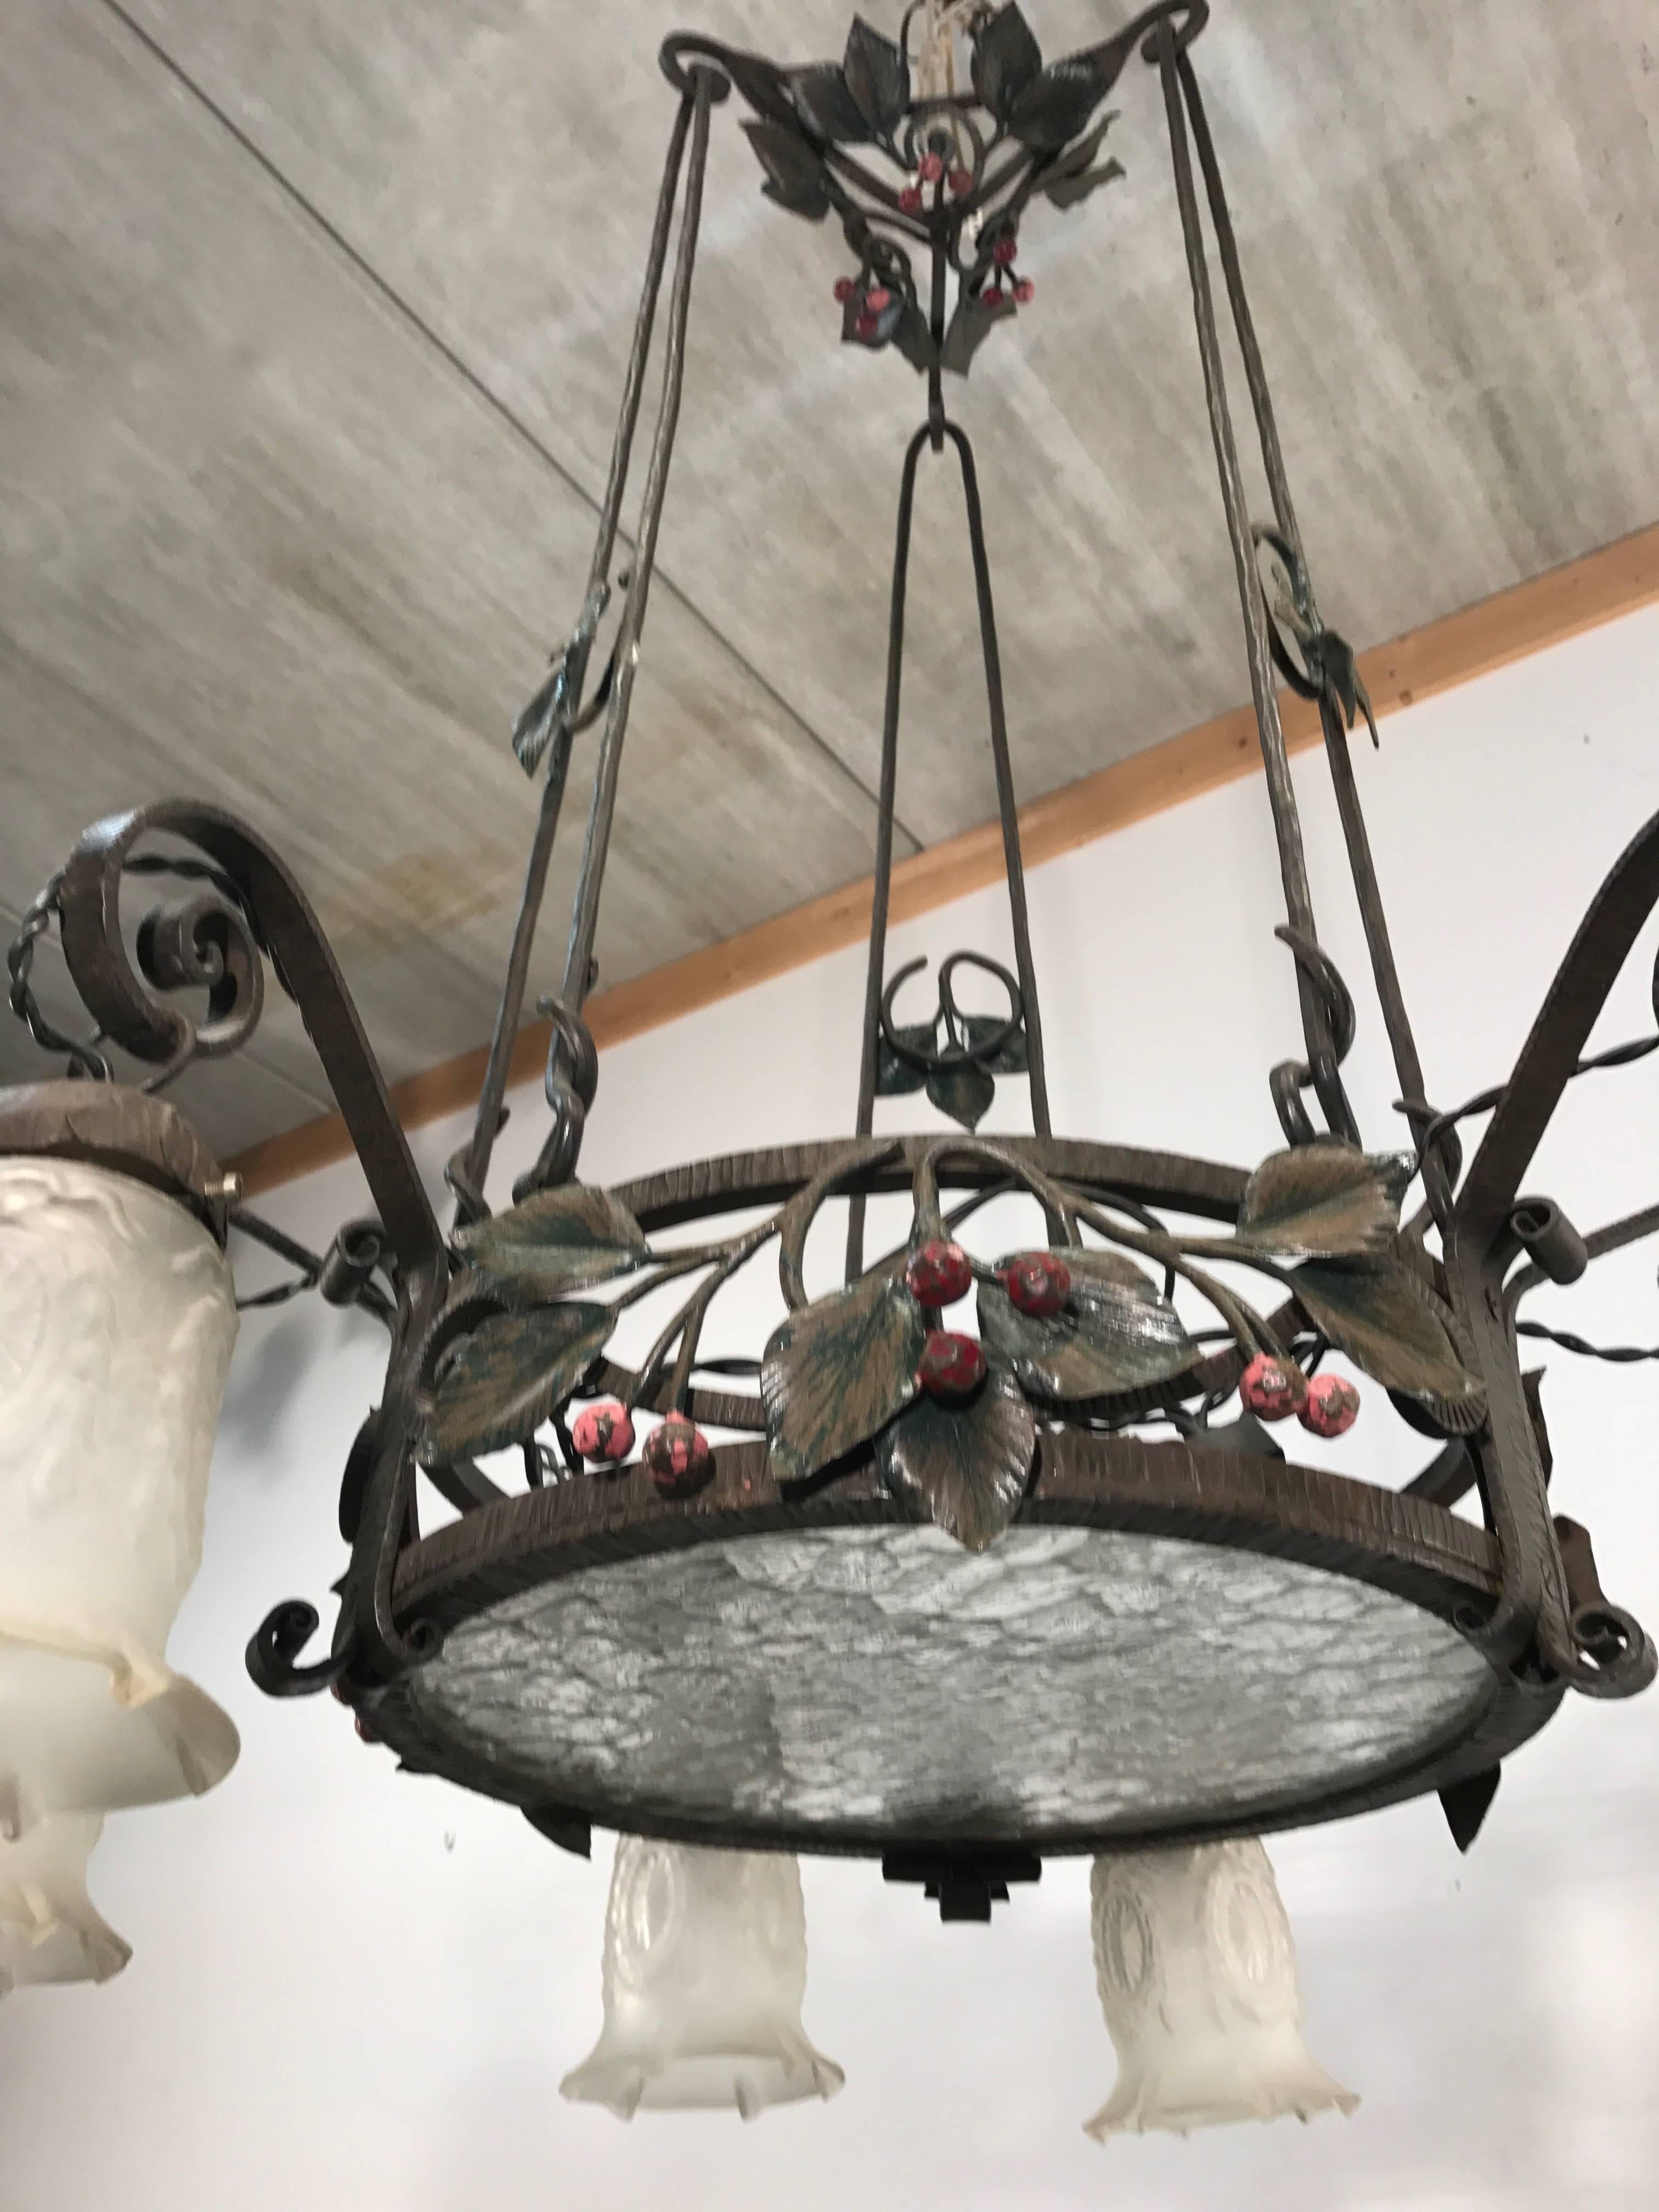 Top Quality and Design Wrought Iron Arts and Crafts Chandelier with Glass Shades For Sale 2